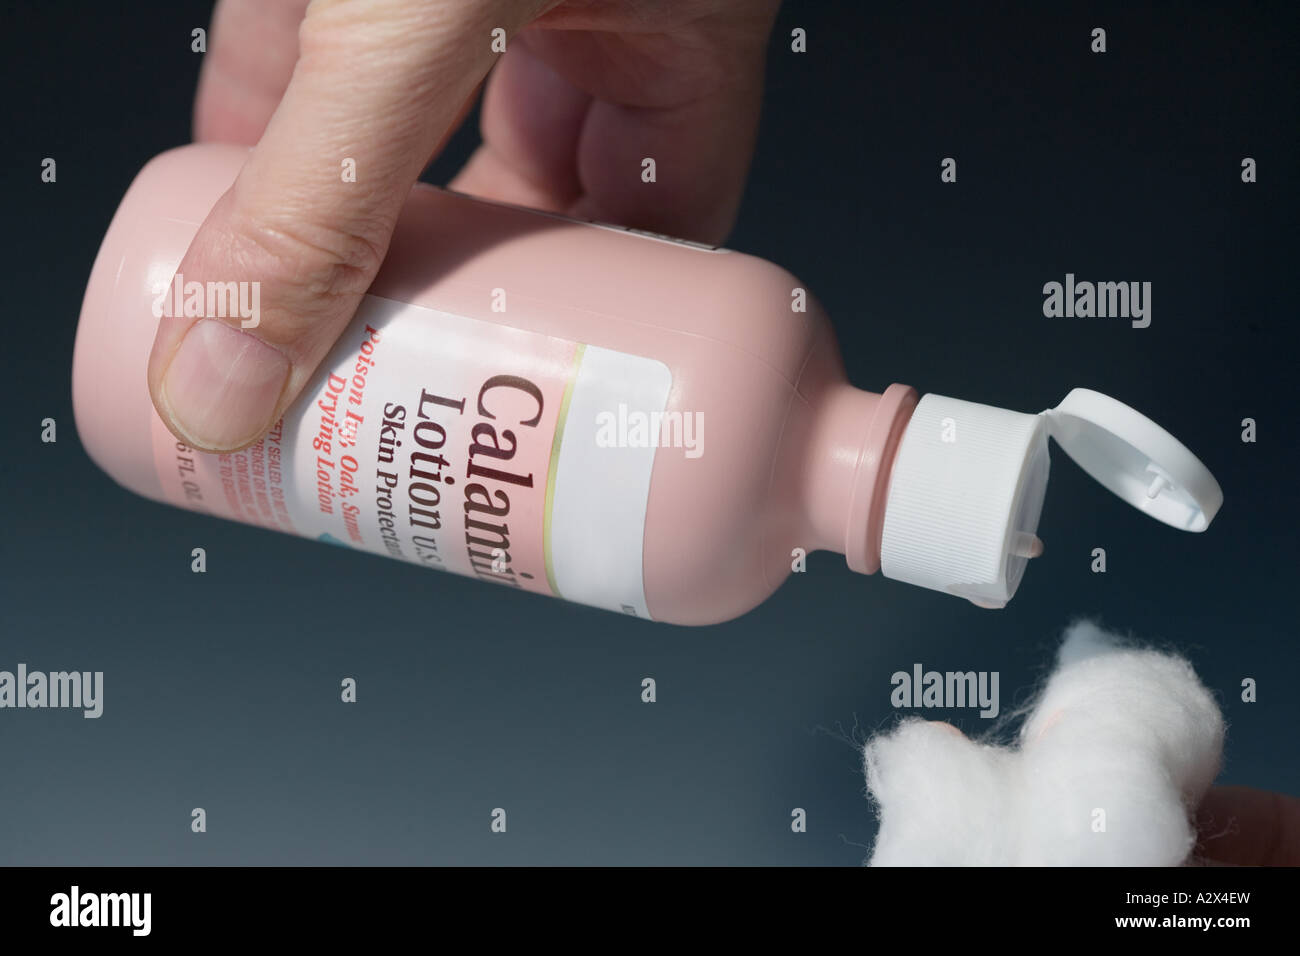 Calamine lotion is often used to relieve the pain of itching due to allergens like Poison Ivy. Stock Photo